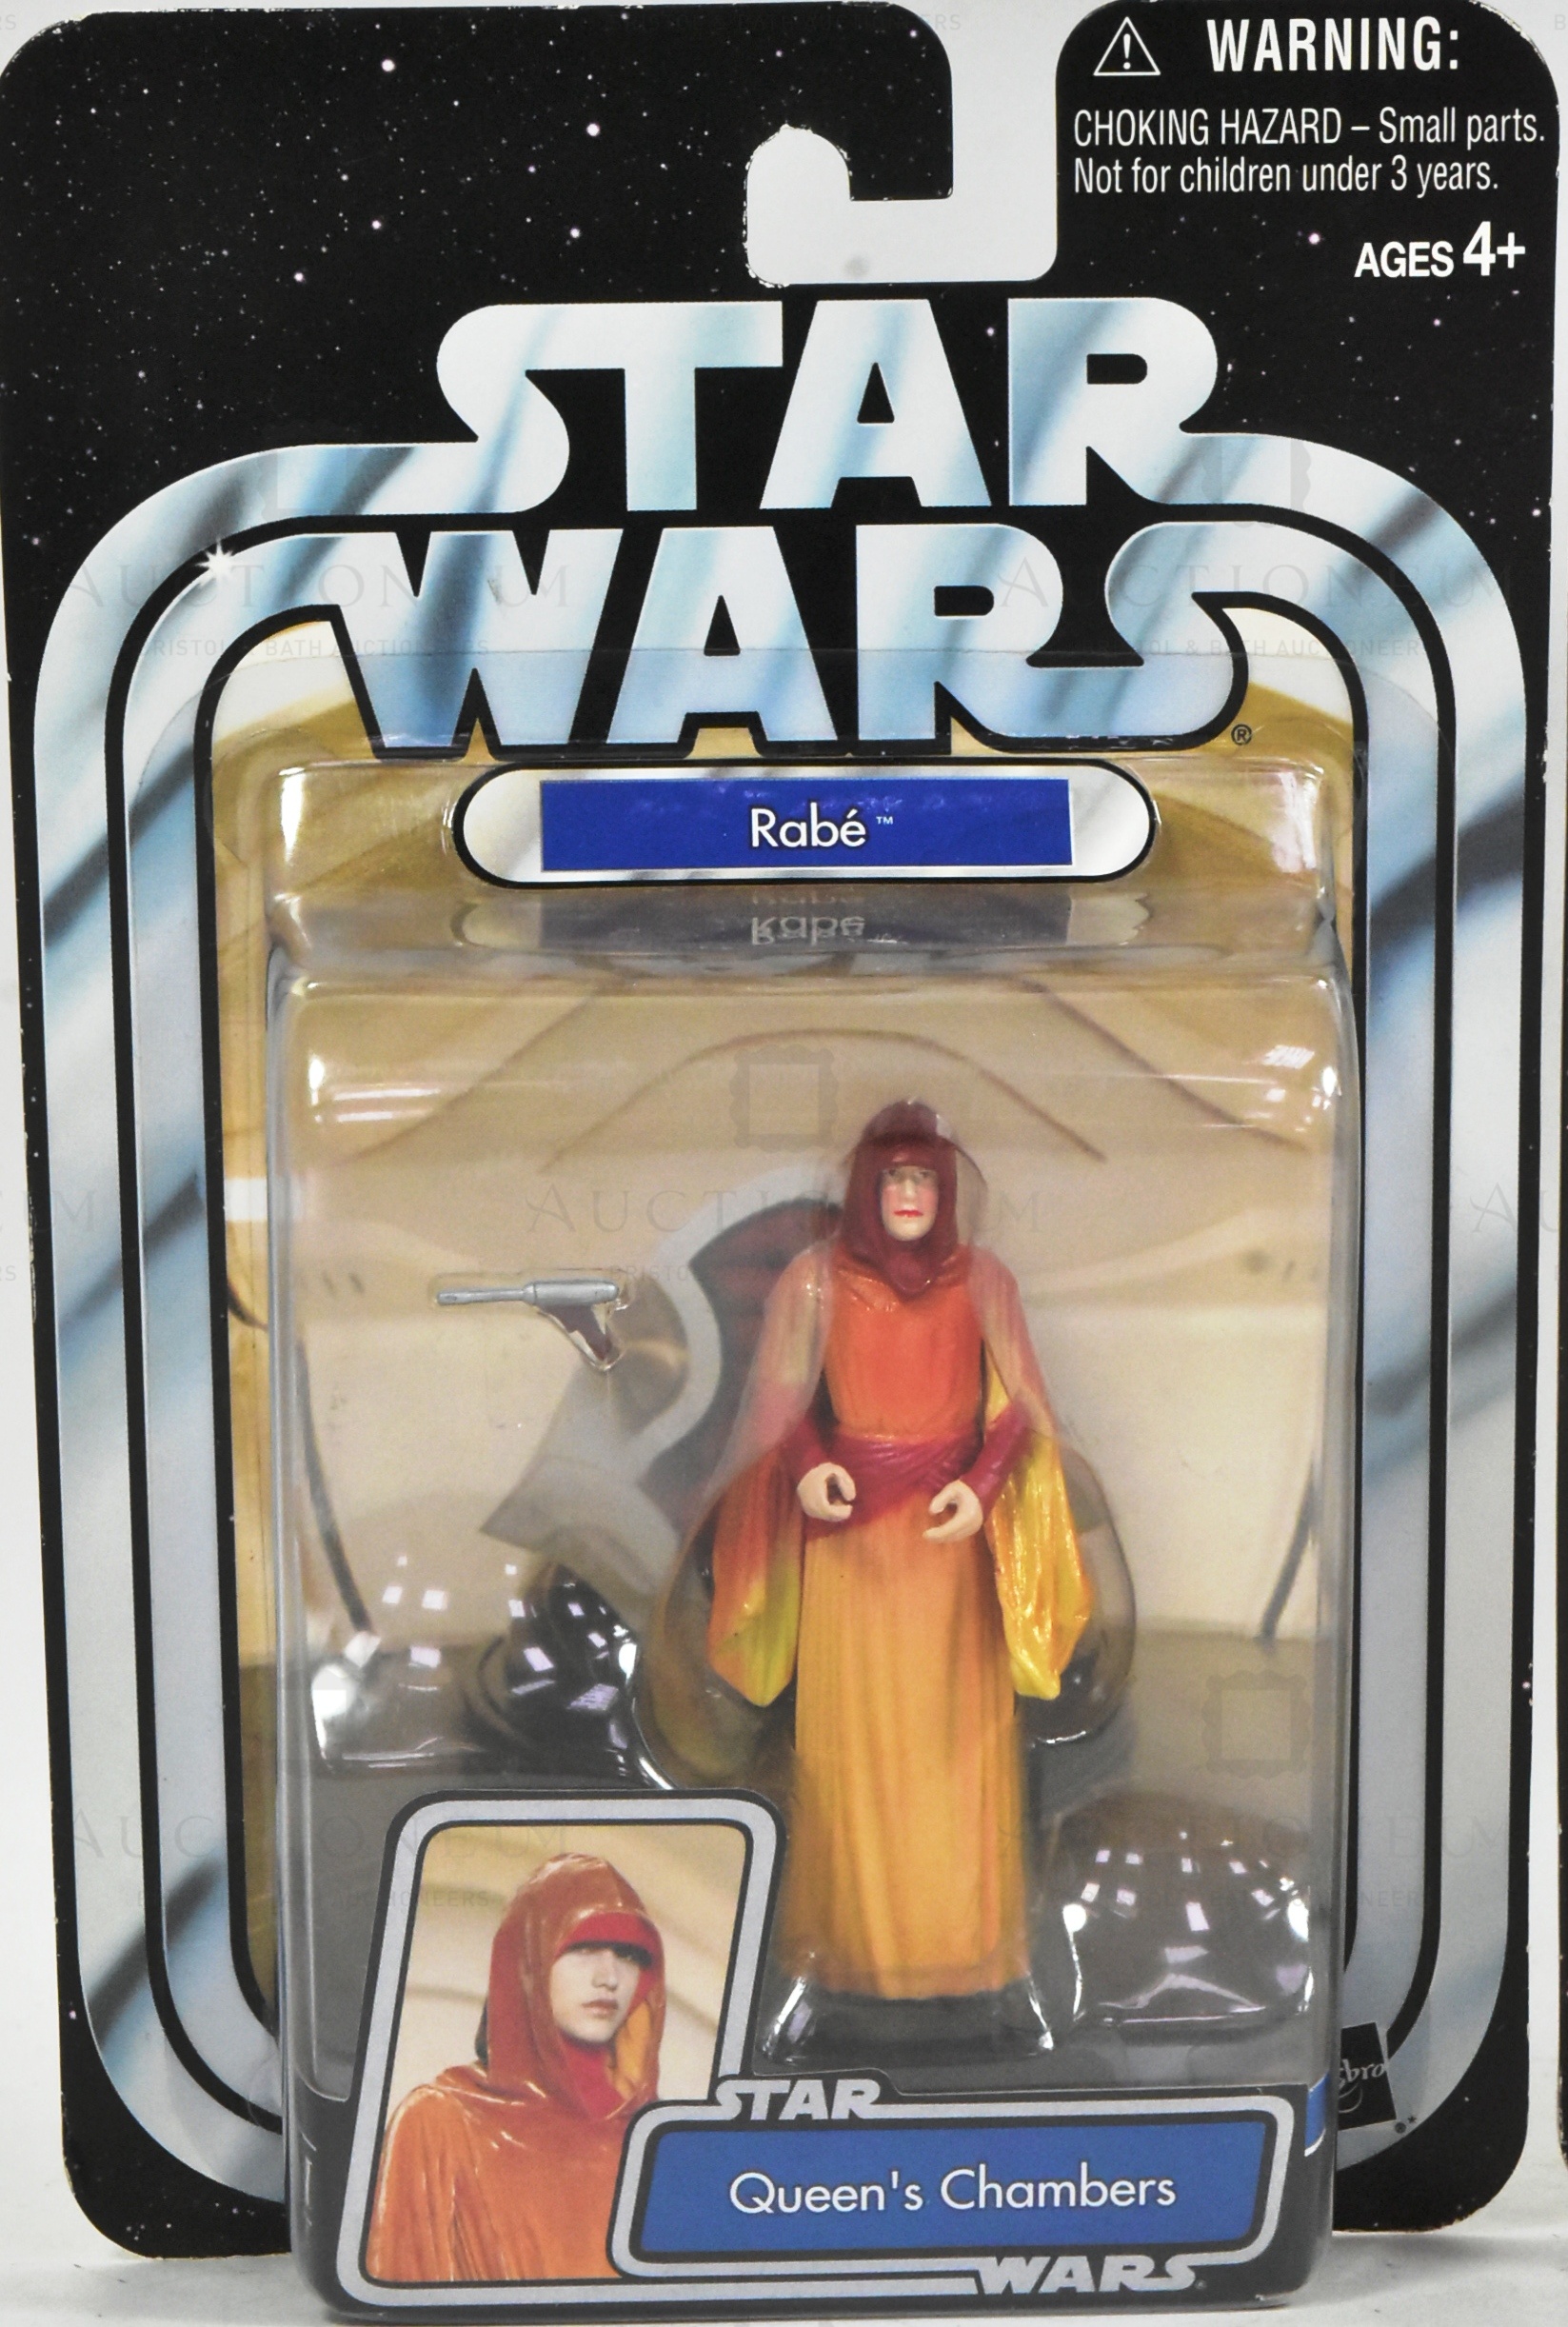 STAR WARS - 2004 COLLECTION OF CARDED ACTION FIGURES - Image 2 of 5